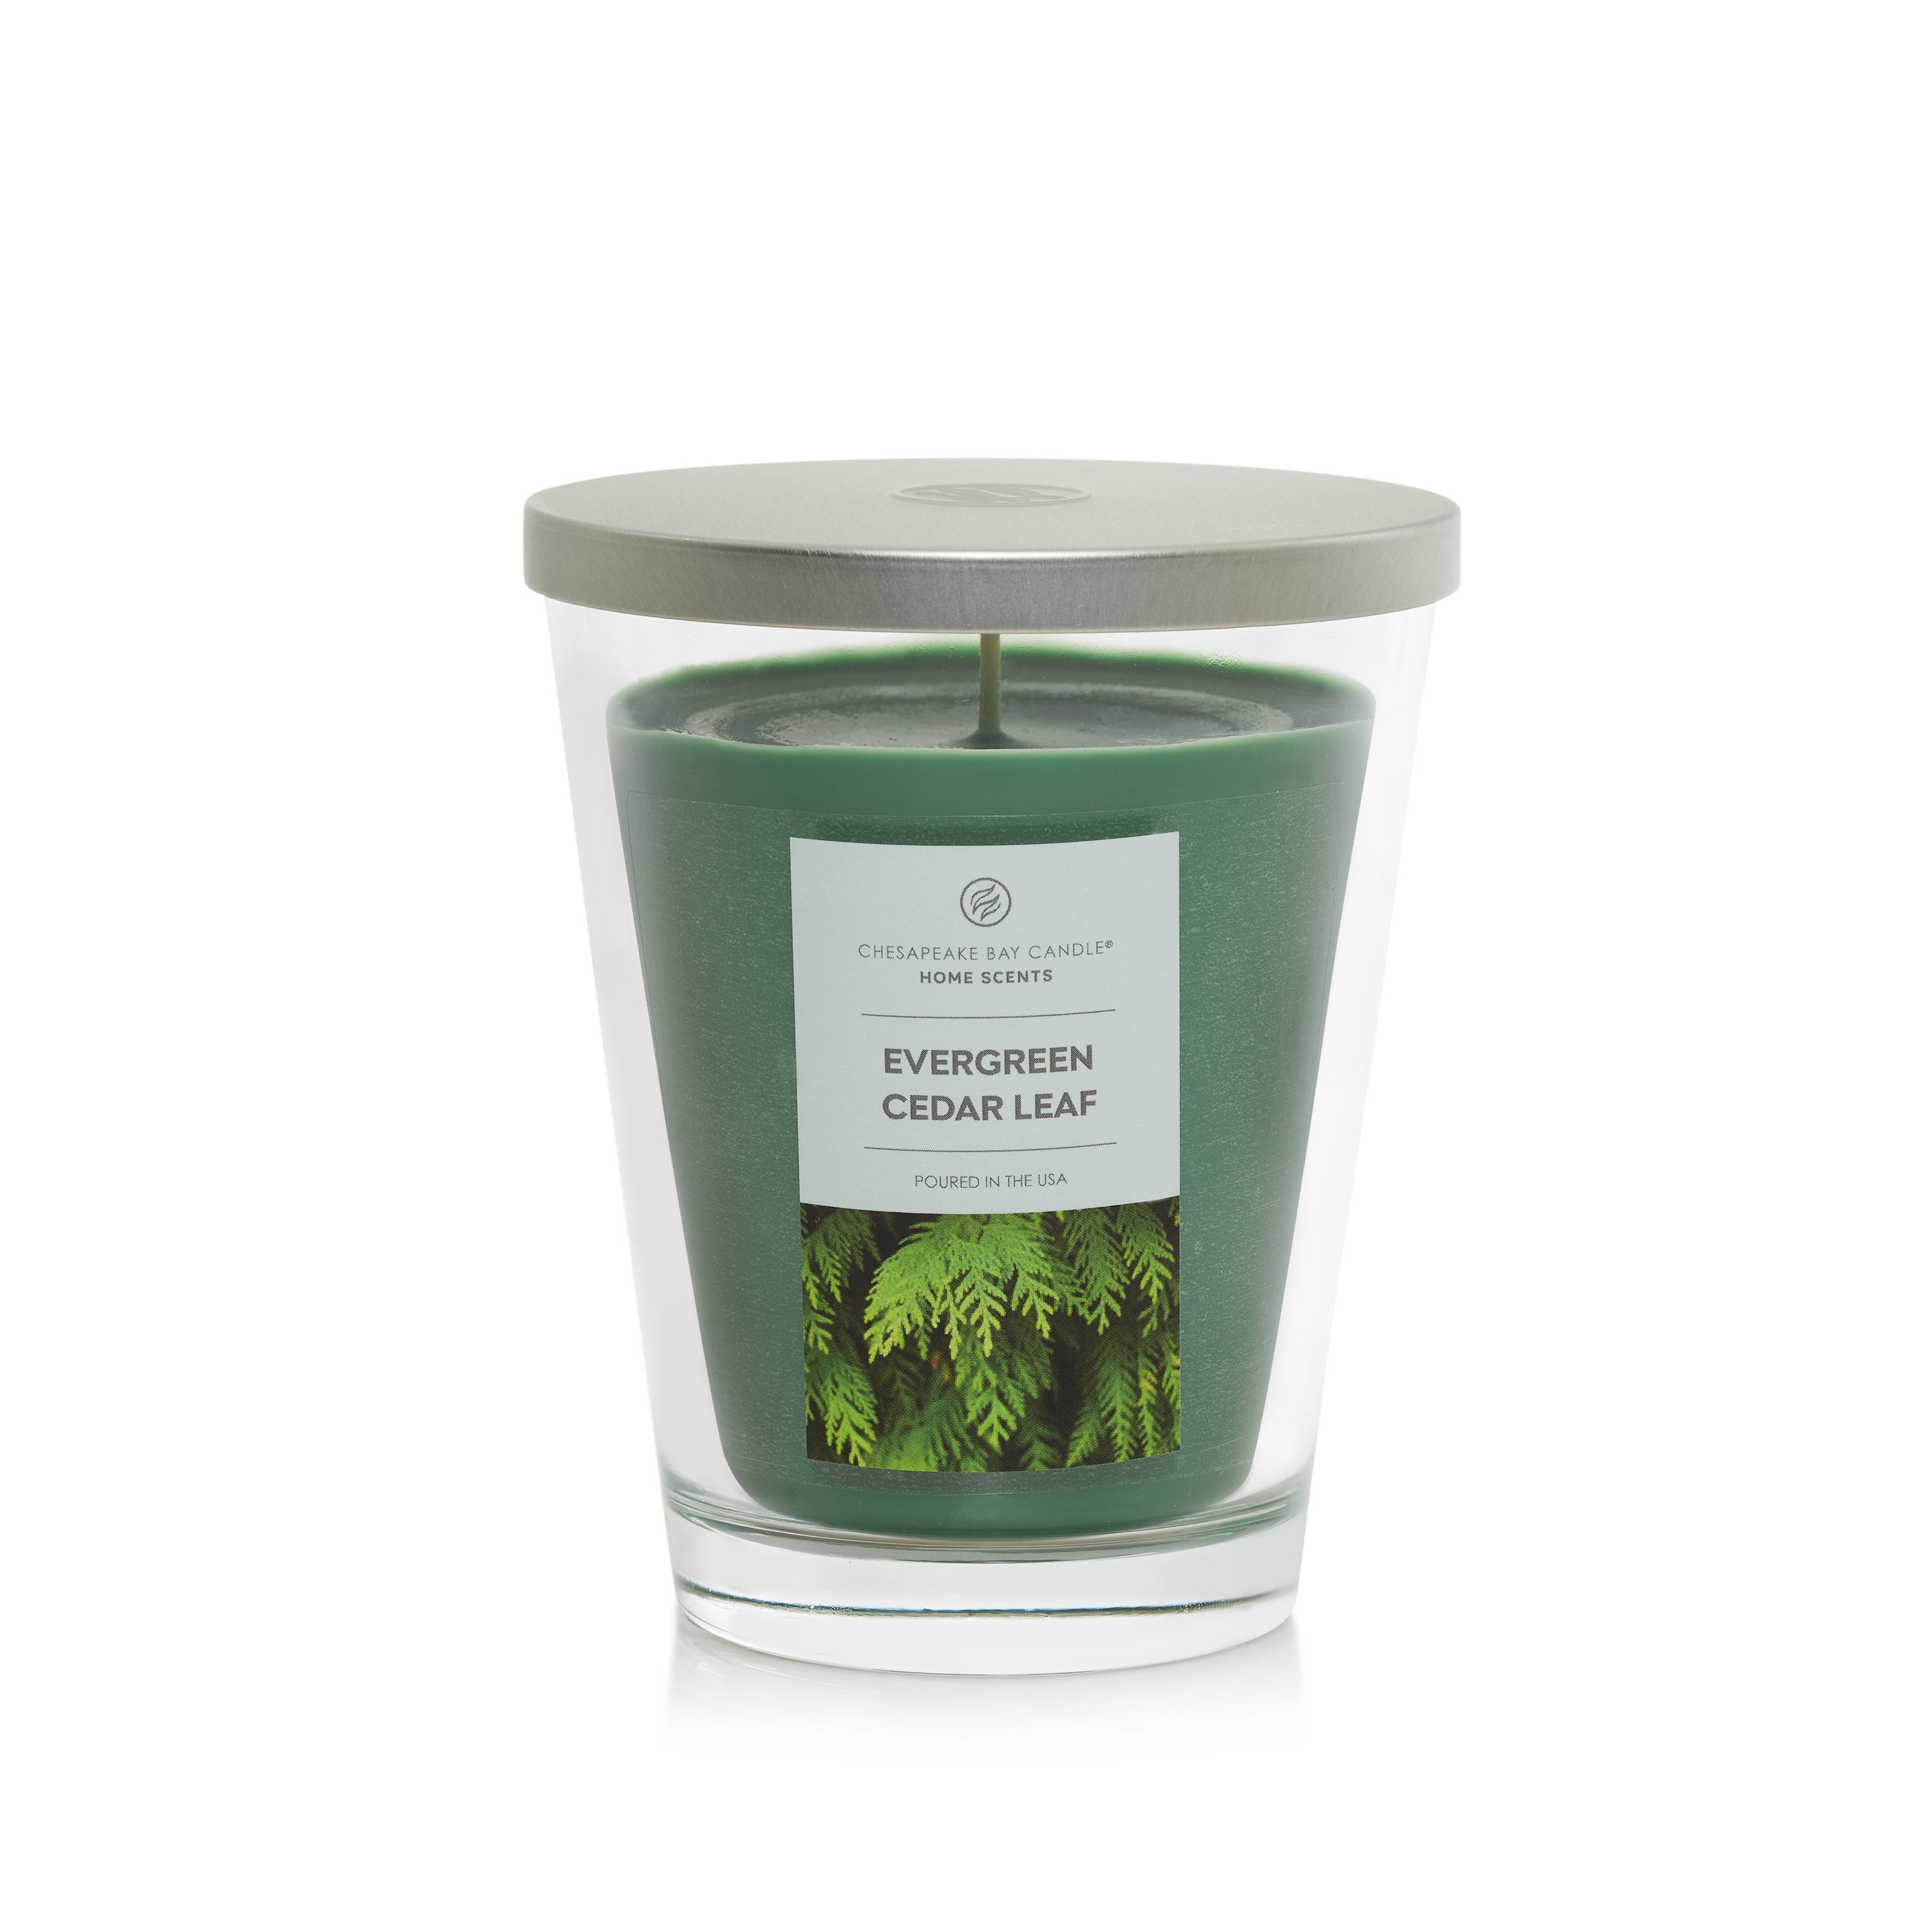 Evergreen Cedar Leaf Chesapeake Bay Candle® Home Scents Collection ...